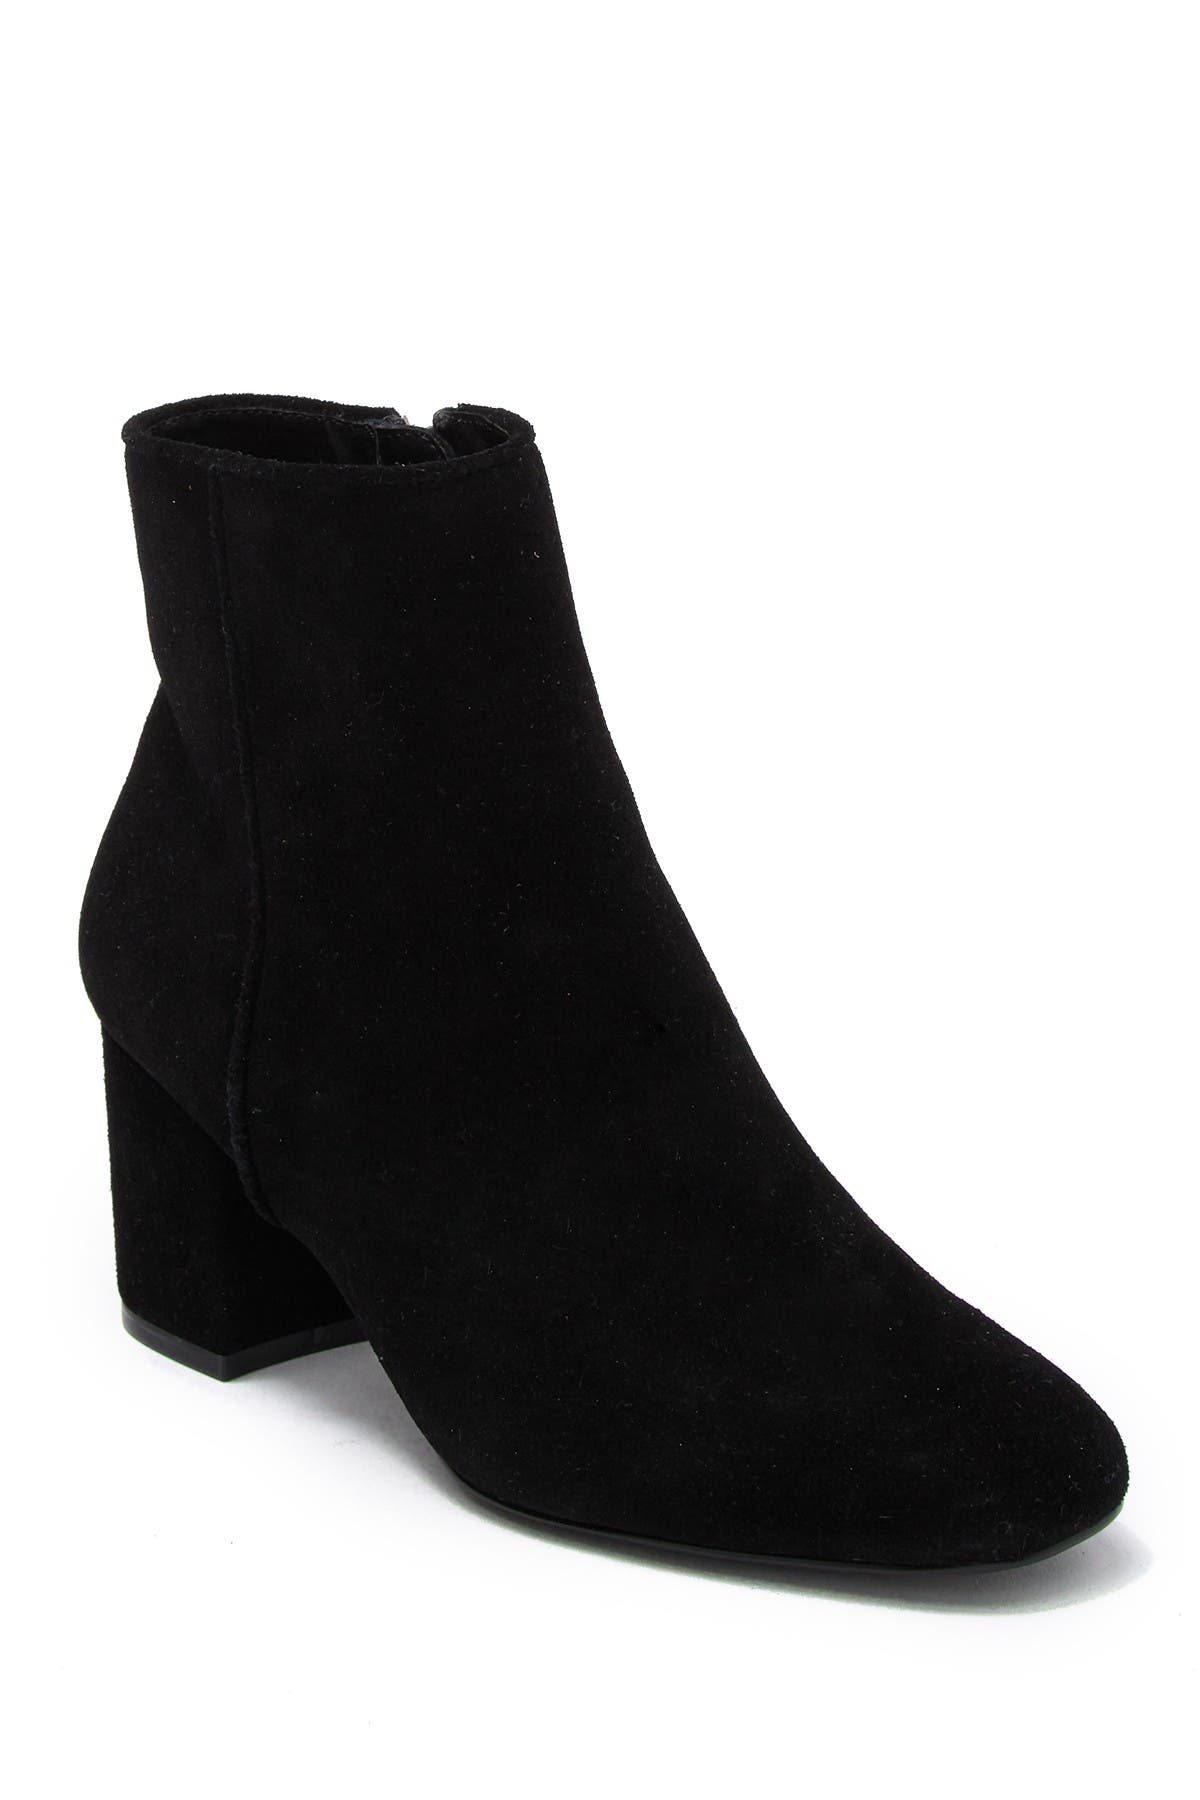 steve madden ankle boots suede